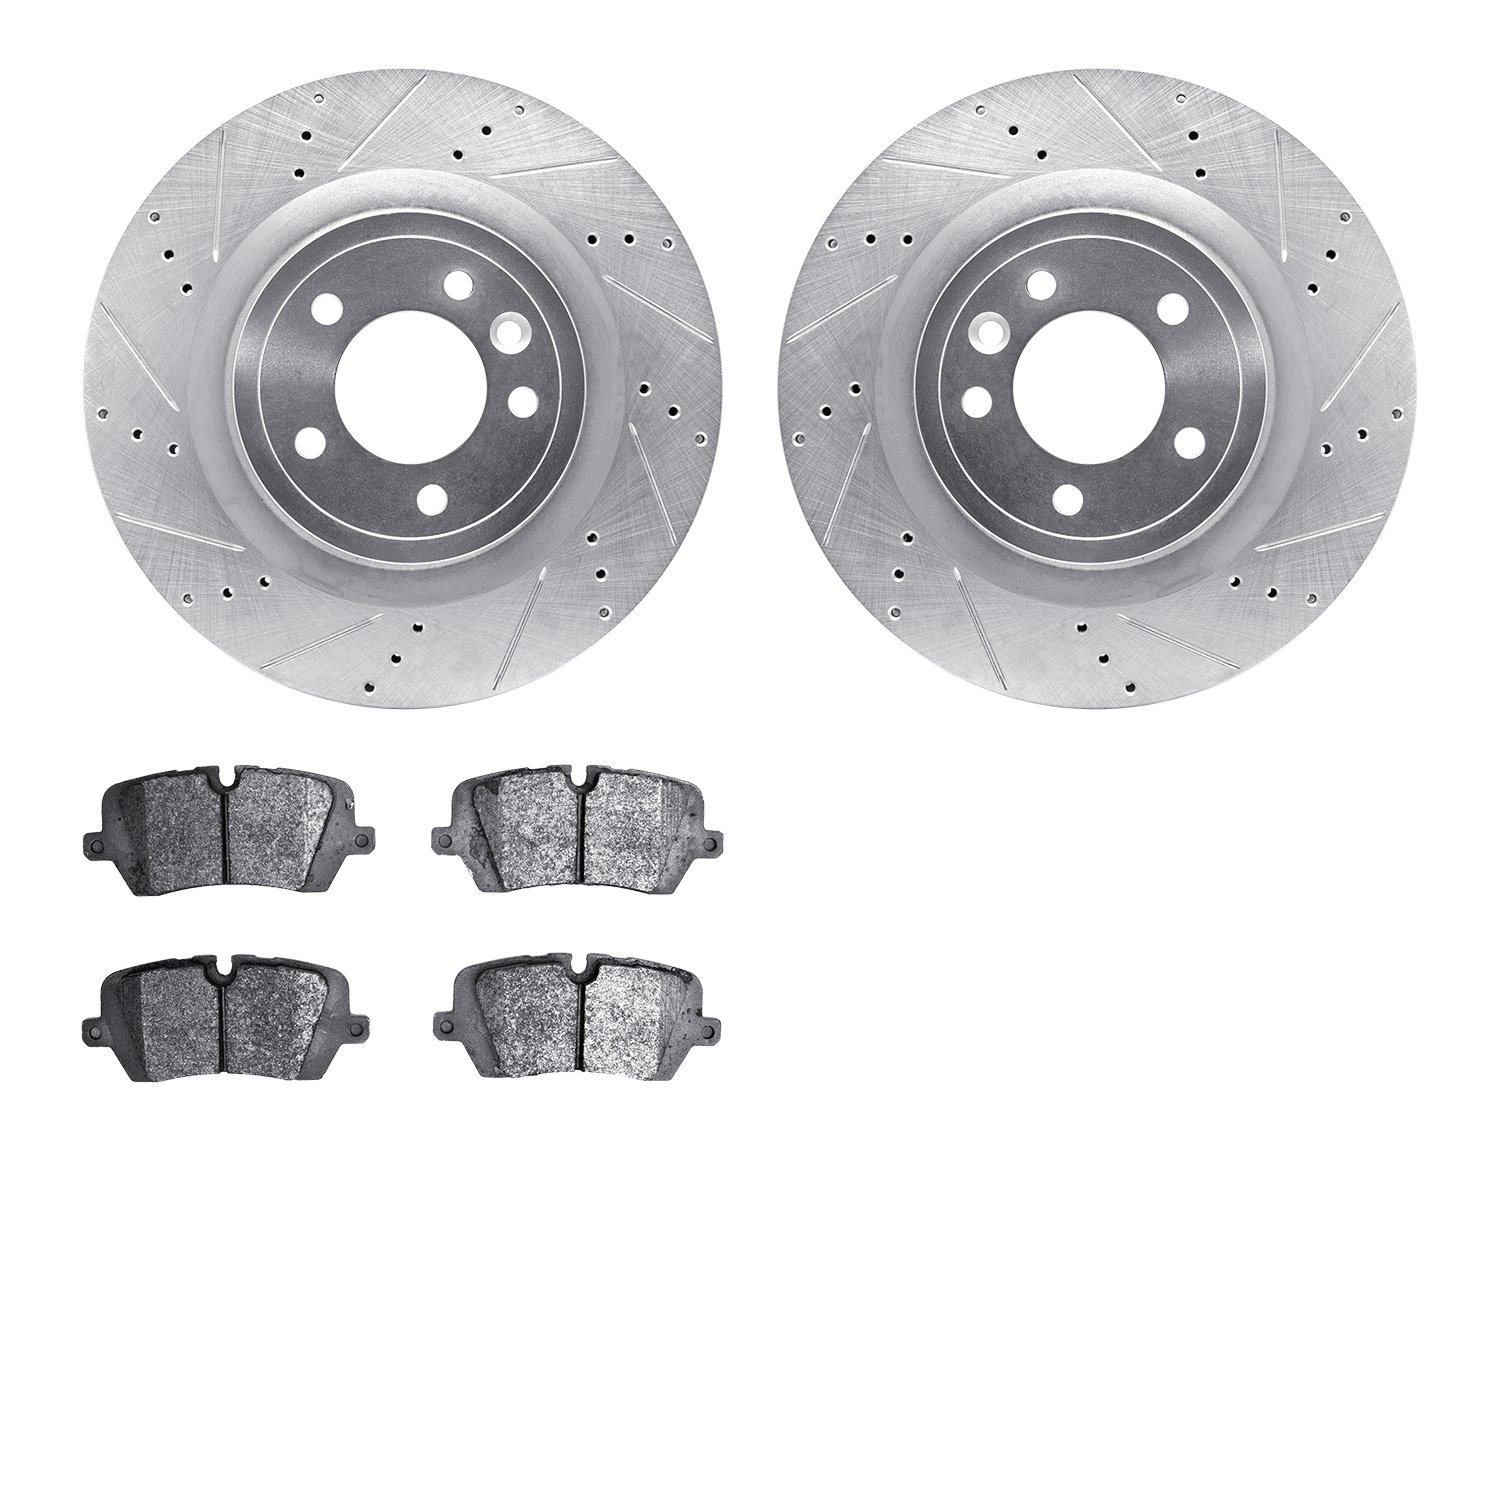 7602-11025 Drilled/Slotted Brake Rotors w/5000 Euro Ceramic Brake Pads Kit [Silver], Fits Select Land Rover, Position: Rear